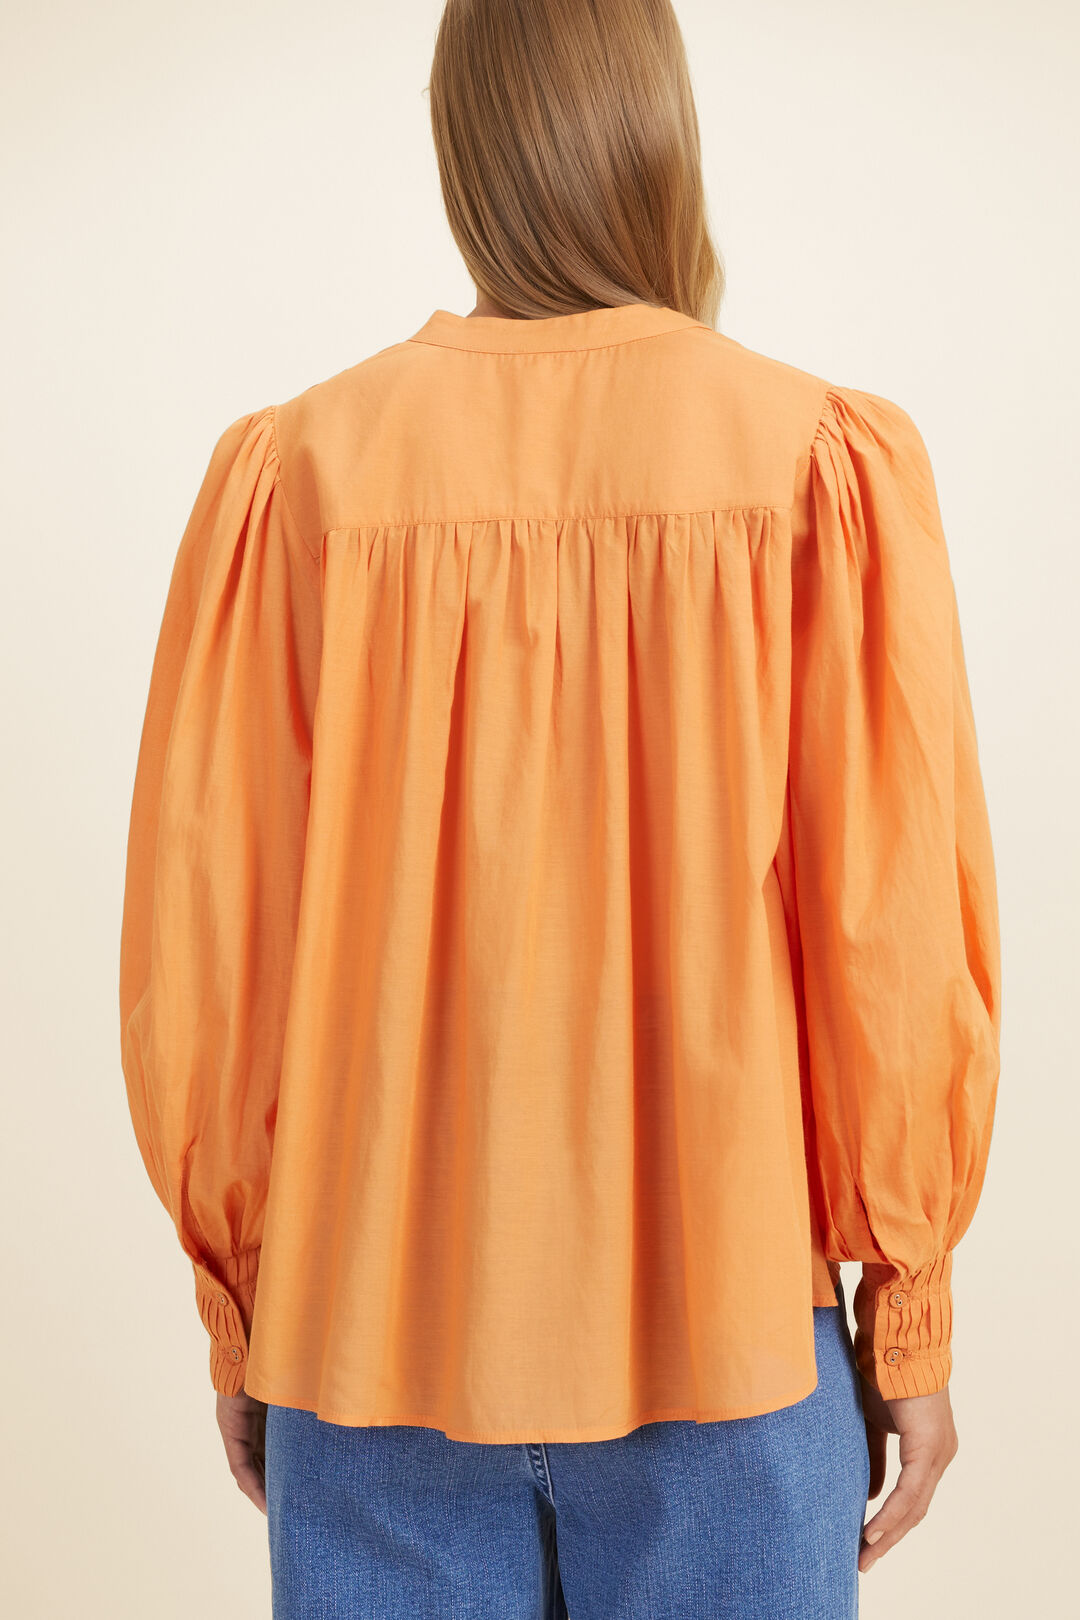 Voile Billow Sleeve Blouse   Dark Apricot  hi-res